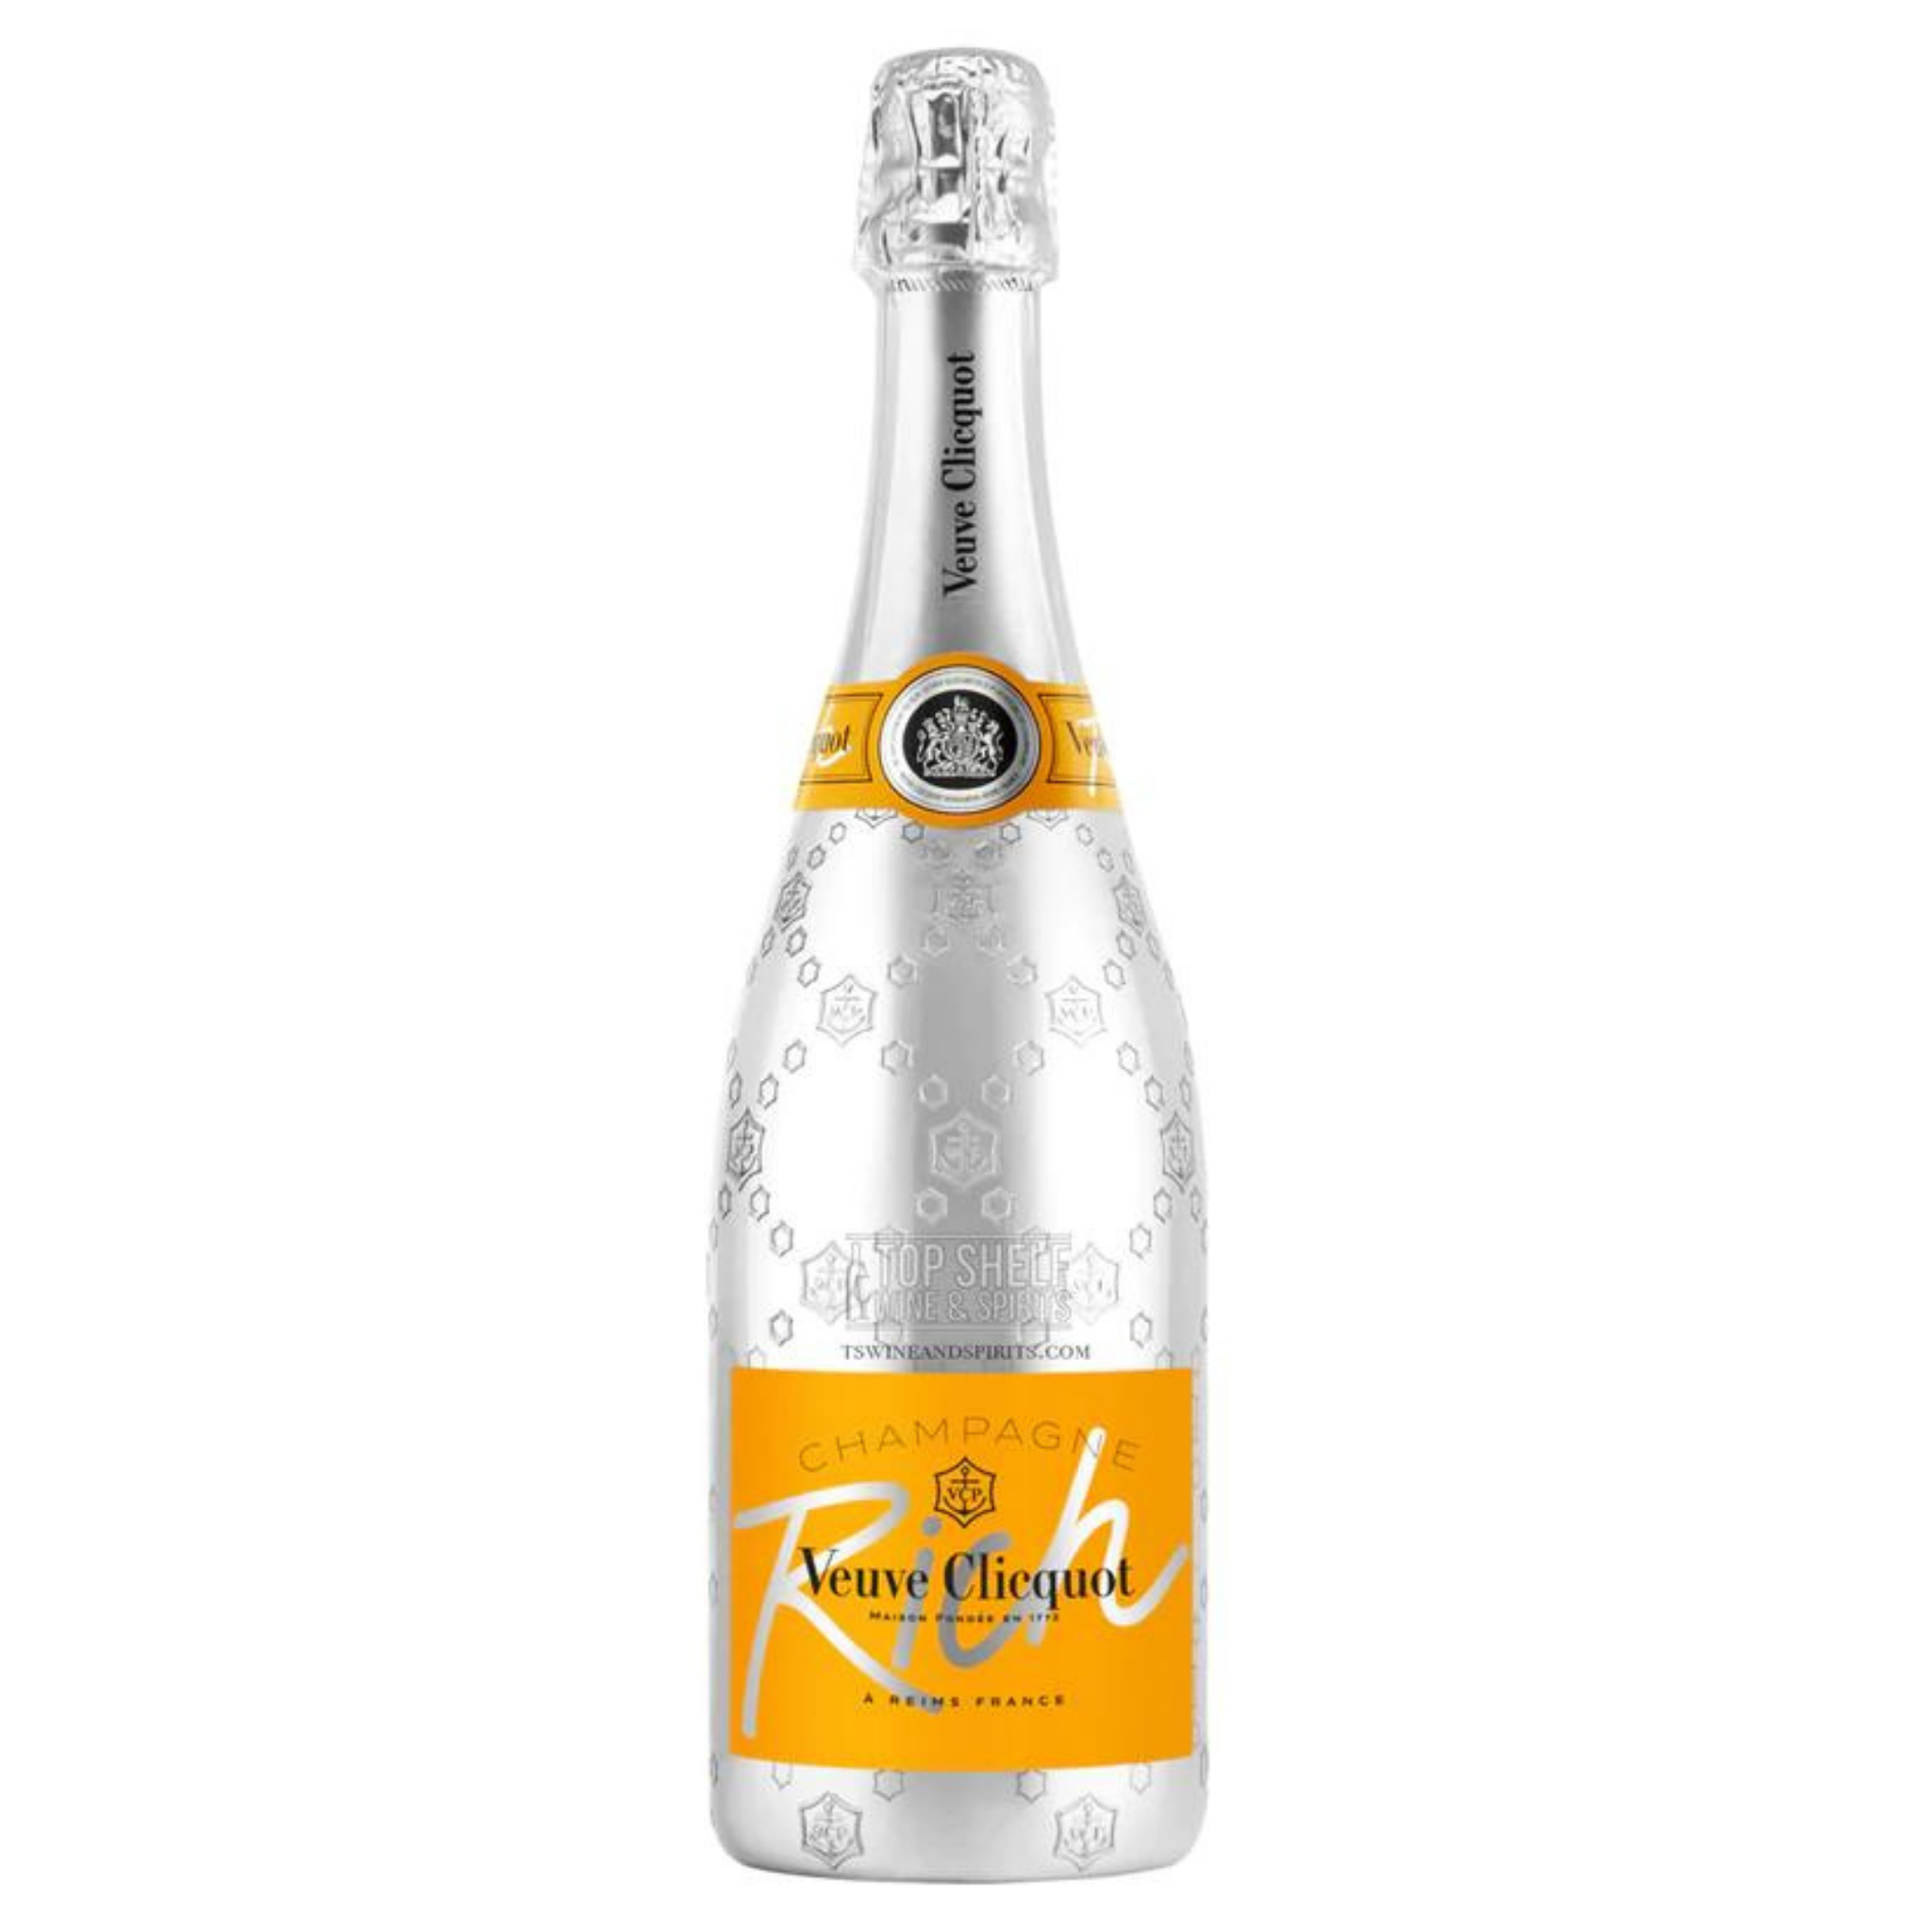 Veuve Clicquot Rich Champagne - The Champagne Cocktail you cannot